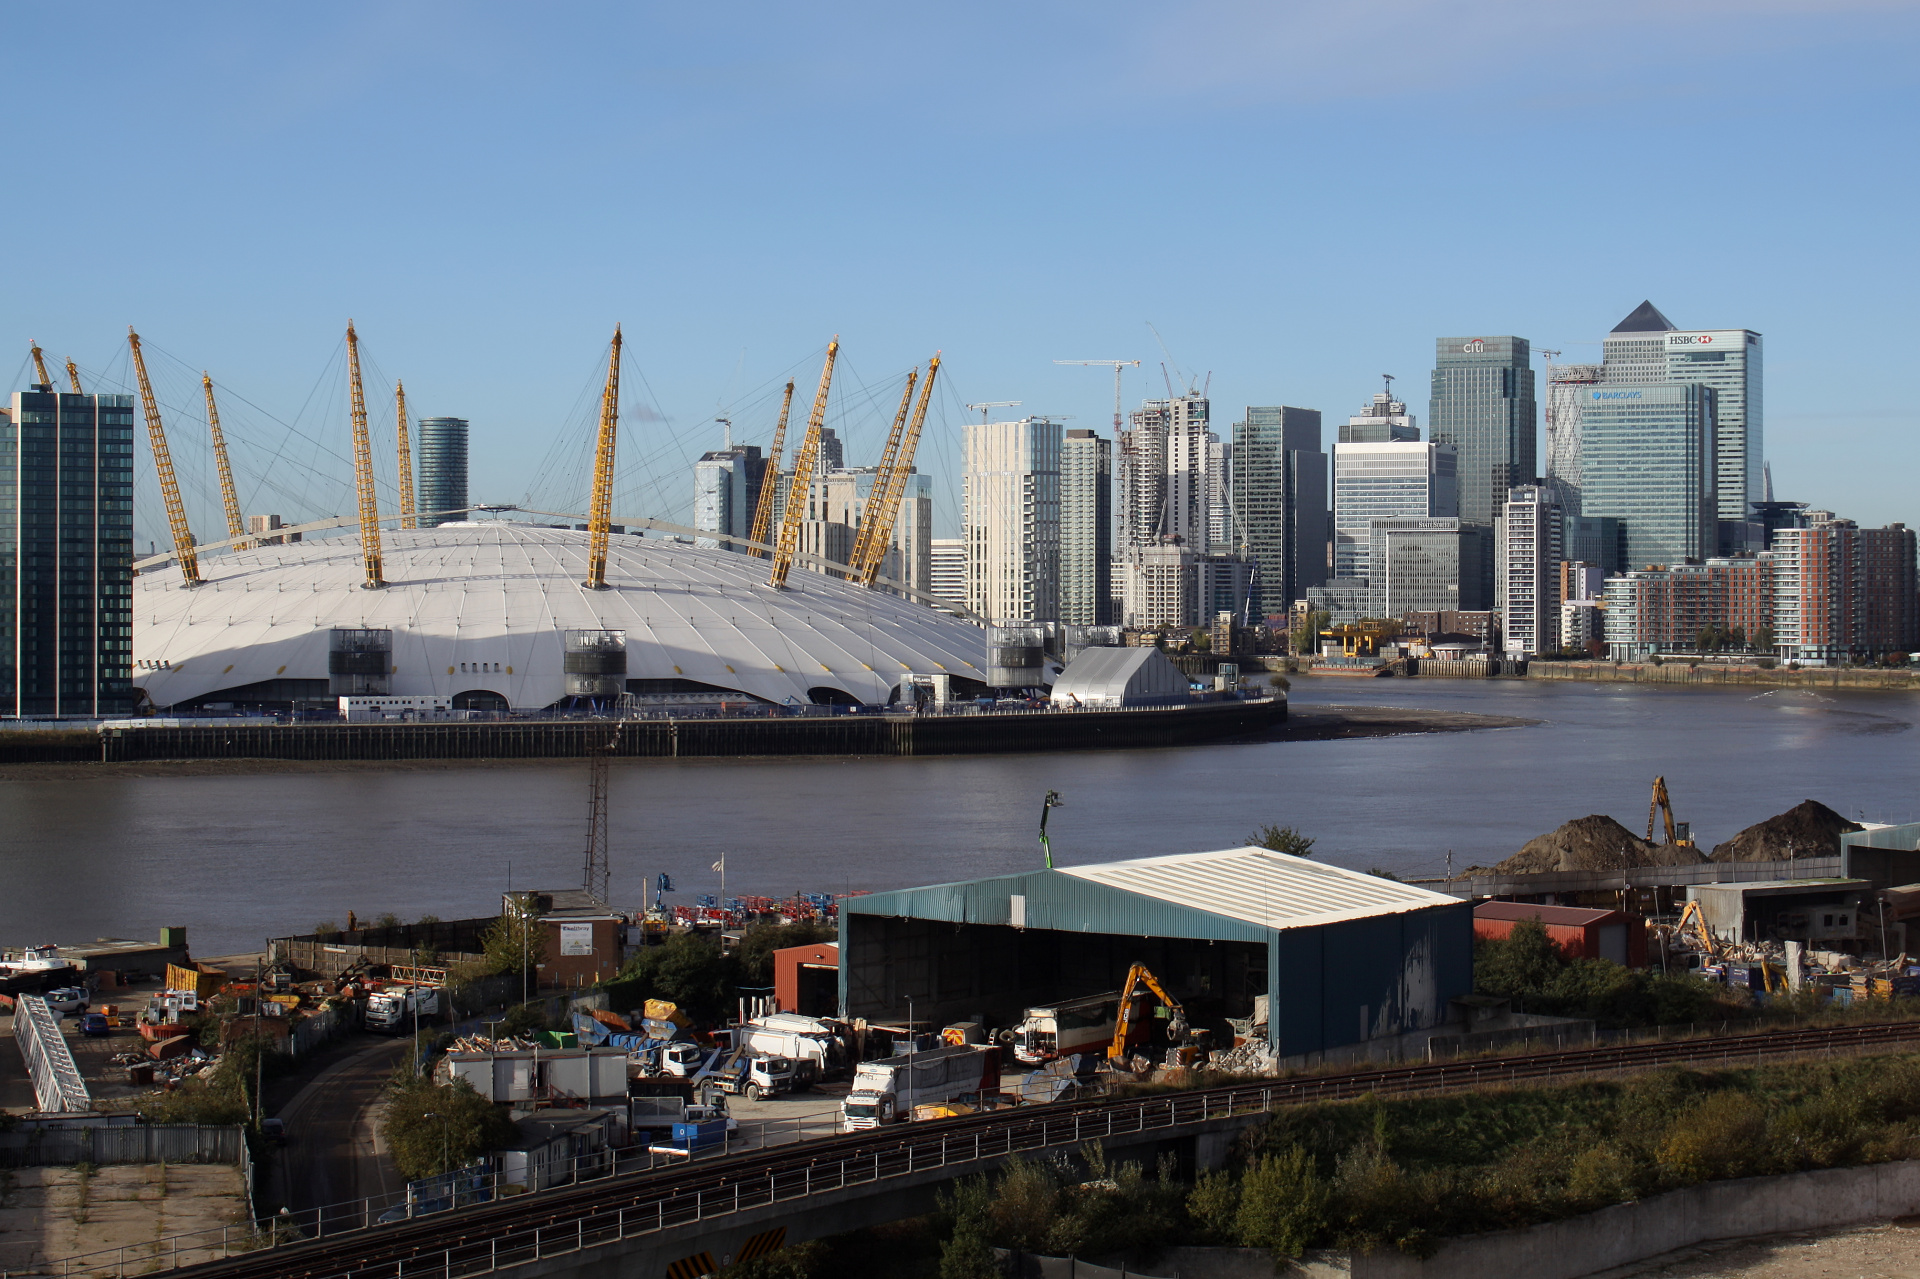 The Thames, The O2 and Canary Wharf (Travels » London » Emirates Air Line)